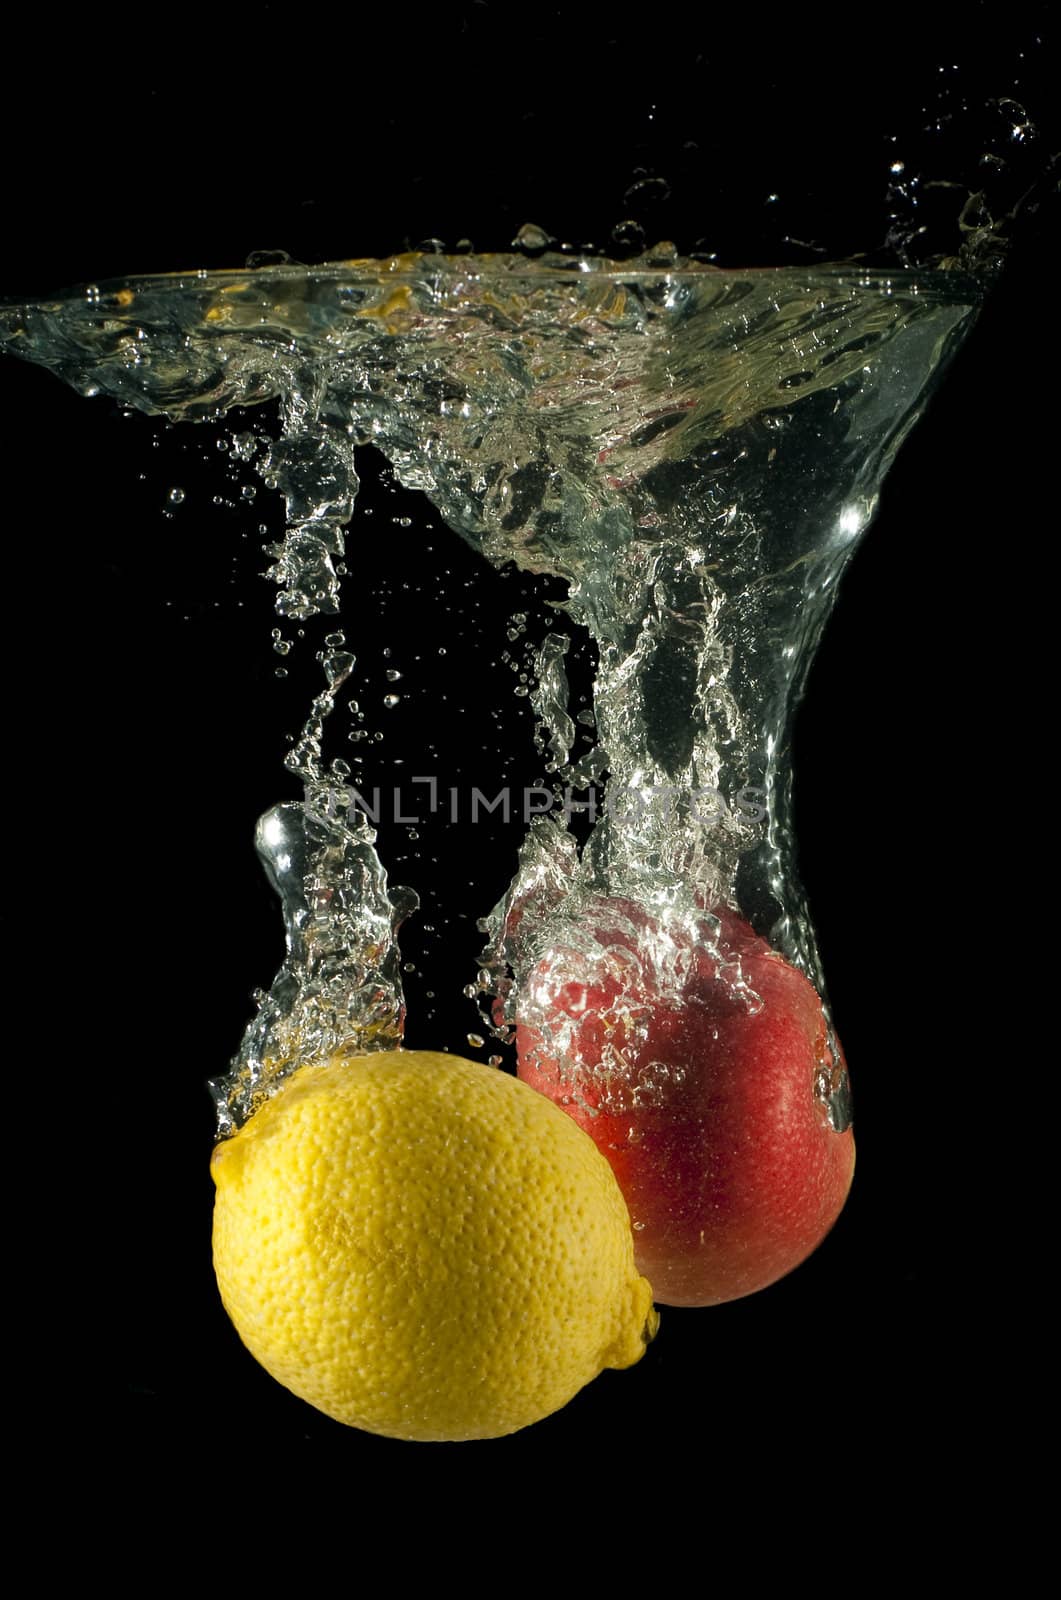 Lemon and apple fall in water